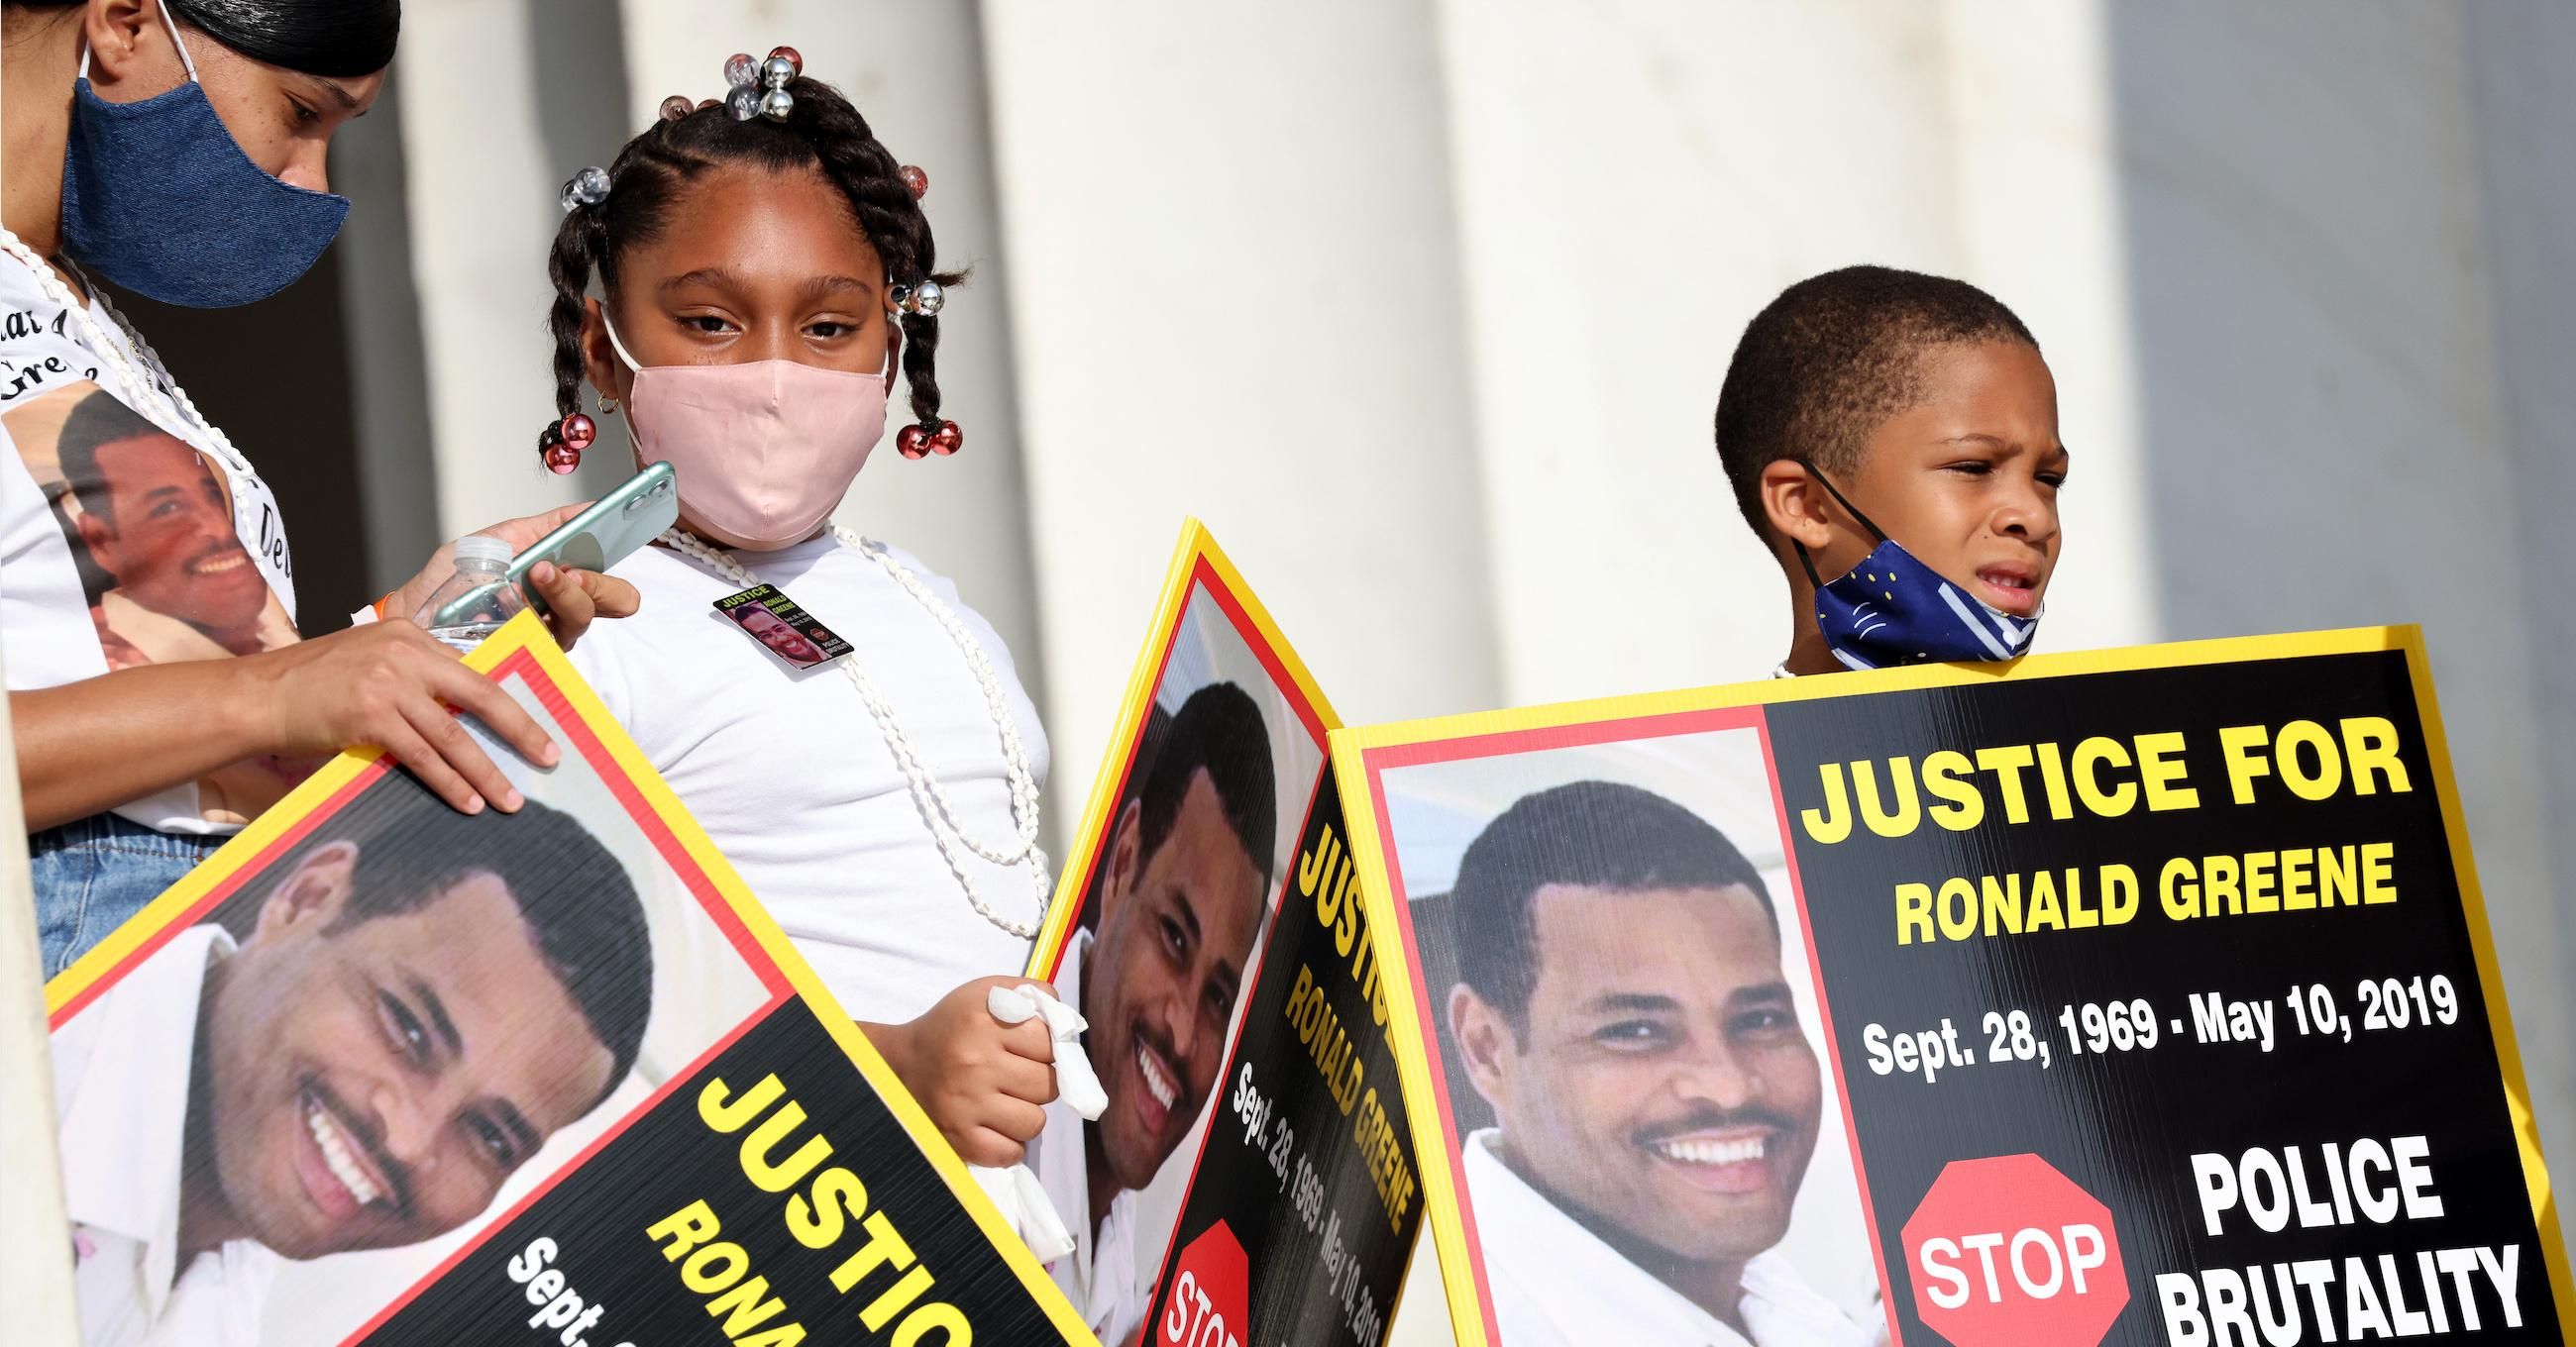 Relatives of Ronald Greene, an unarmed Black man who died following his brutal arrest by Louisiana State Police troopers in May 2019, demand justice during an August 28, 2020 demonstration at the Lincoln Memorial in Washington, D.C. (Photo: Michael M. Santiago/Getty Images) 